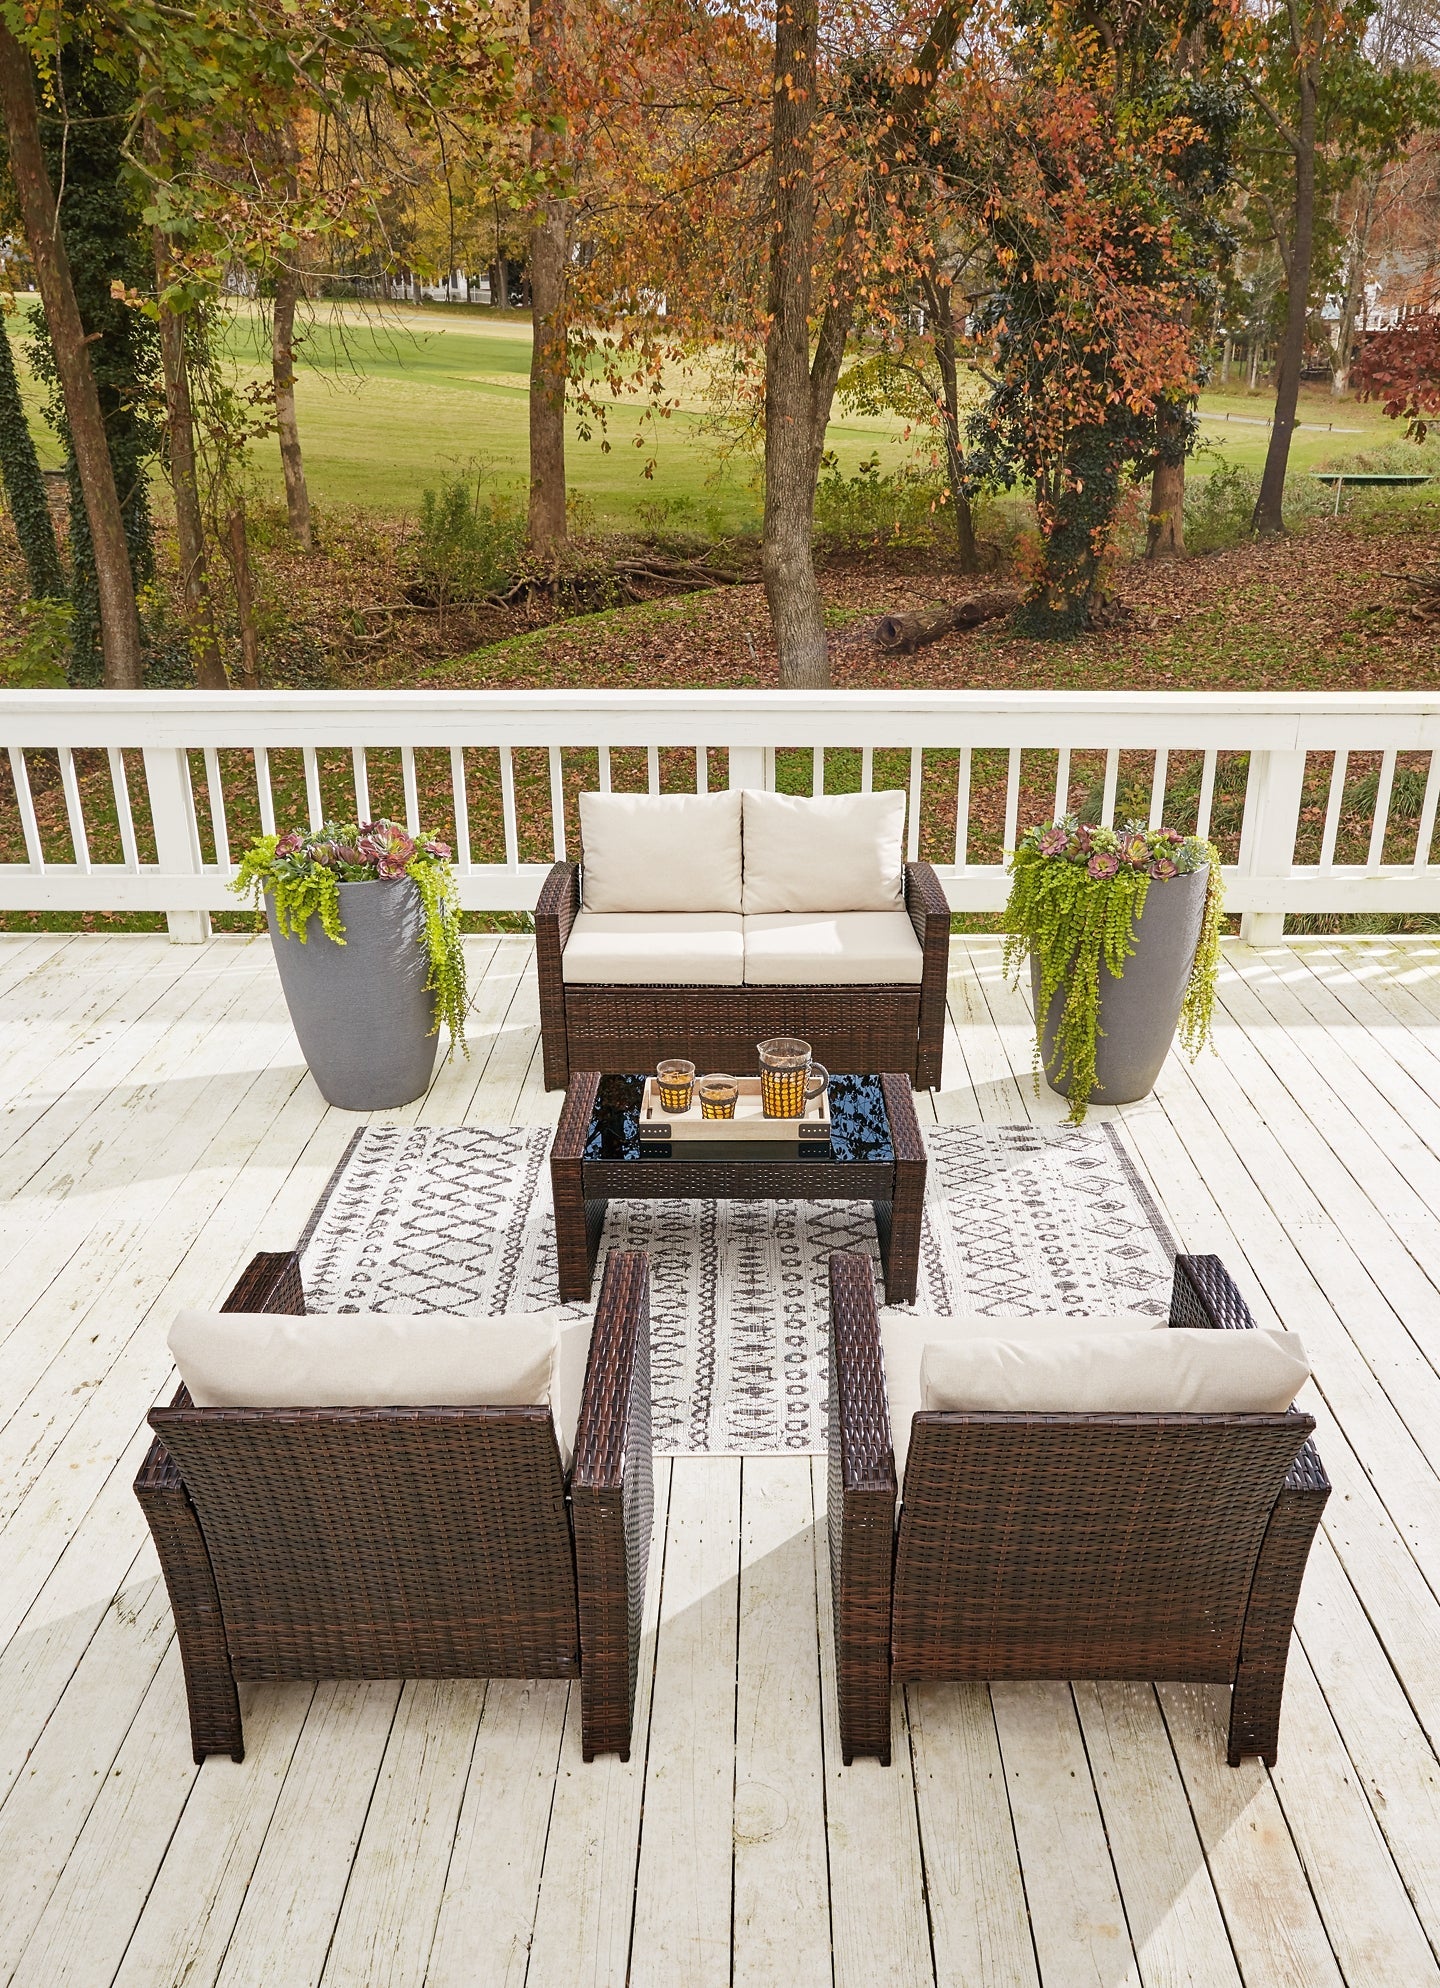 East Brook Outdoor Loveseat and 2 Lounge Chairs with Coffee Table